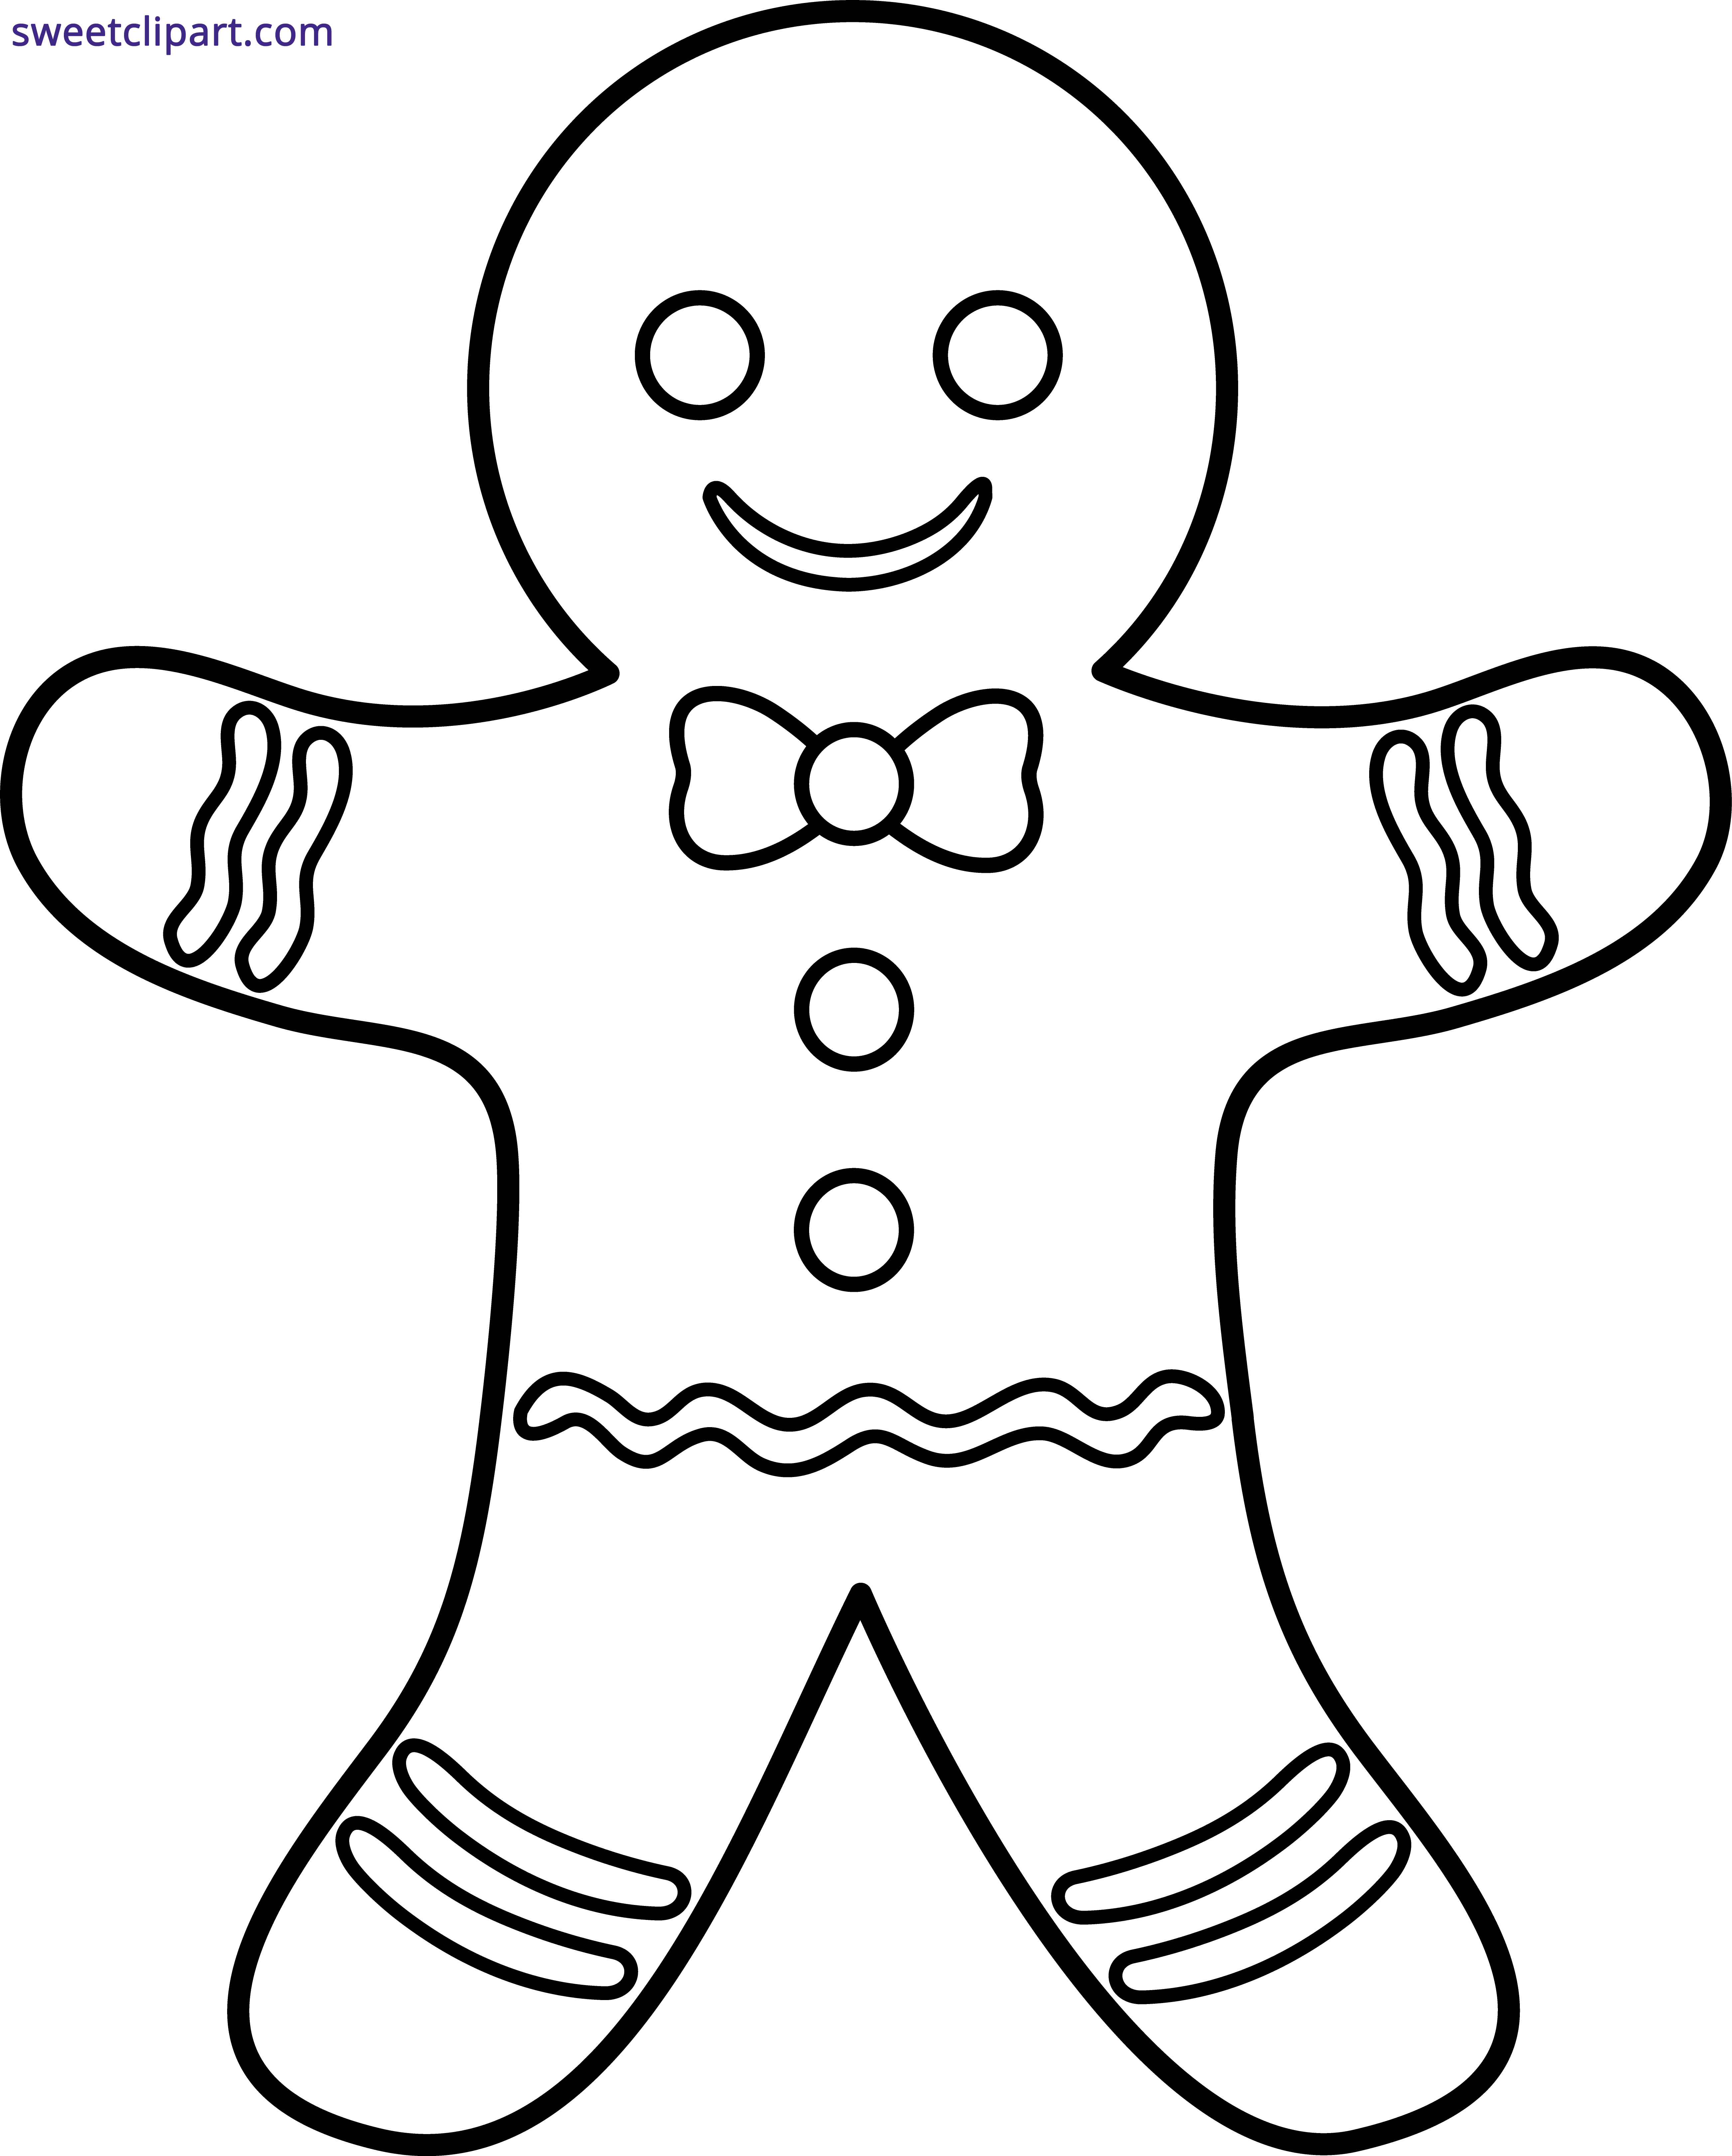 Gingerbread Man Outline Clipart.